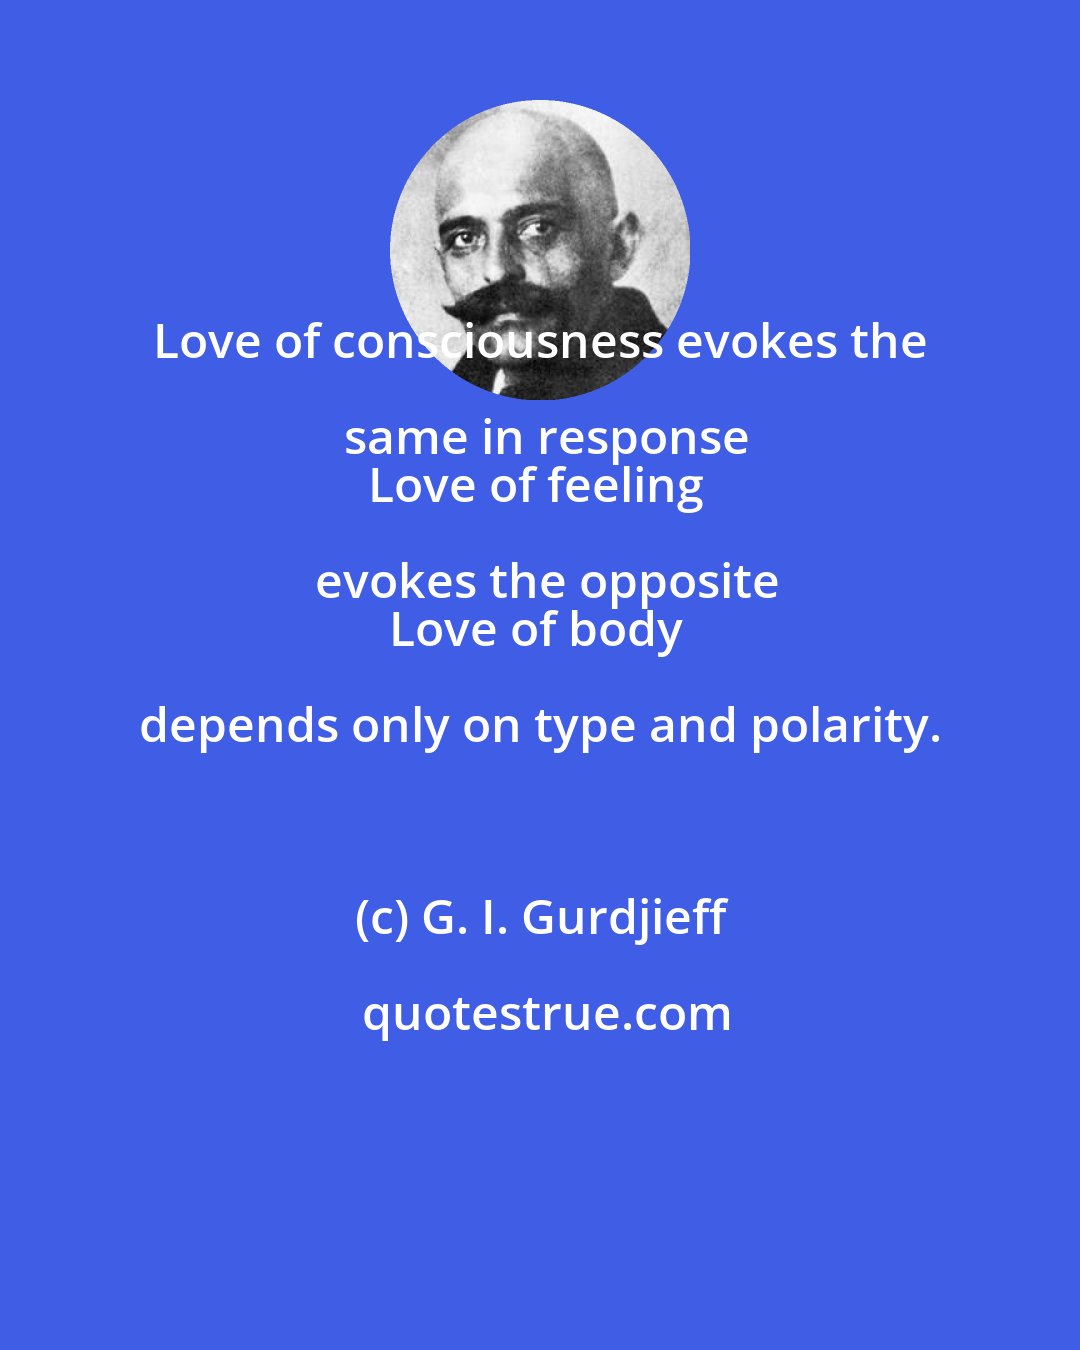 G. I. Gurdjieff: Love of consciousness evokes the same in response
Love of feeling evokes the opposite
Love of body depends only on type and polarity.